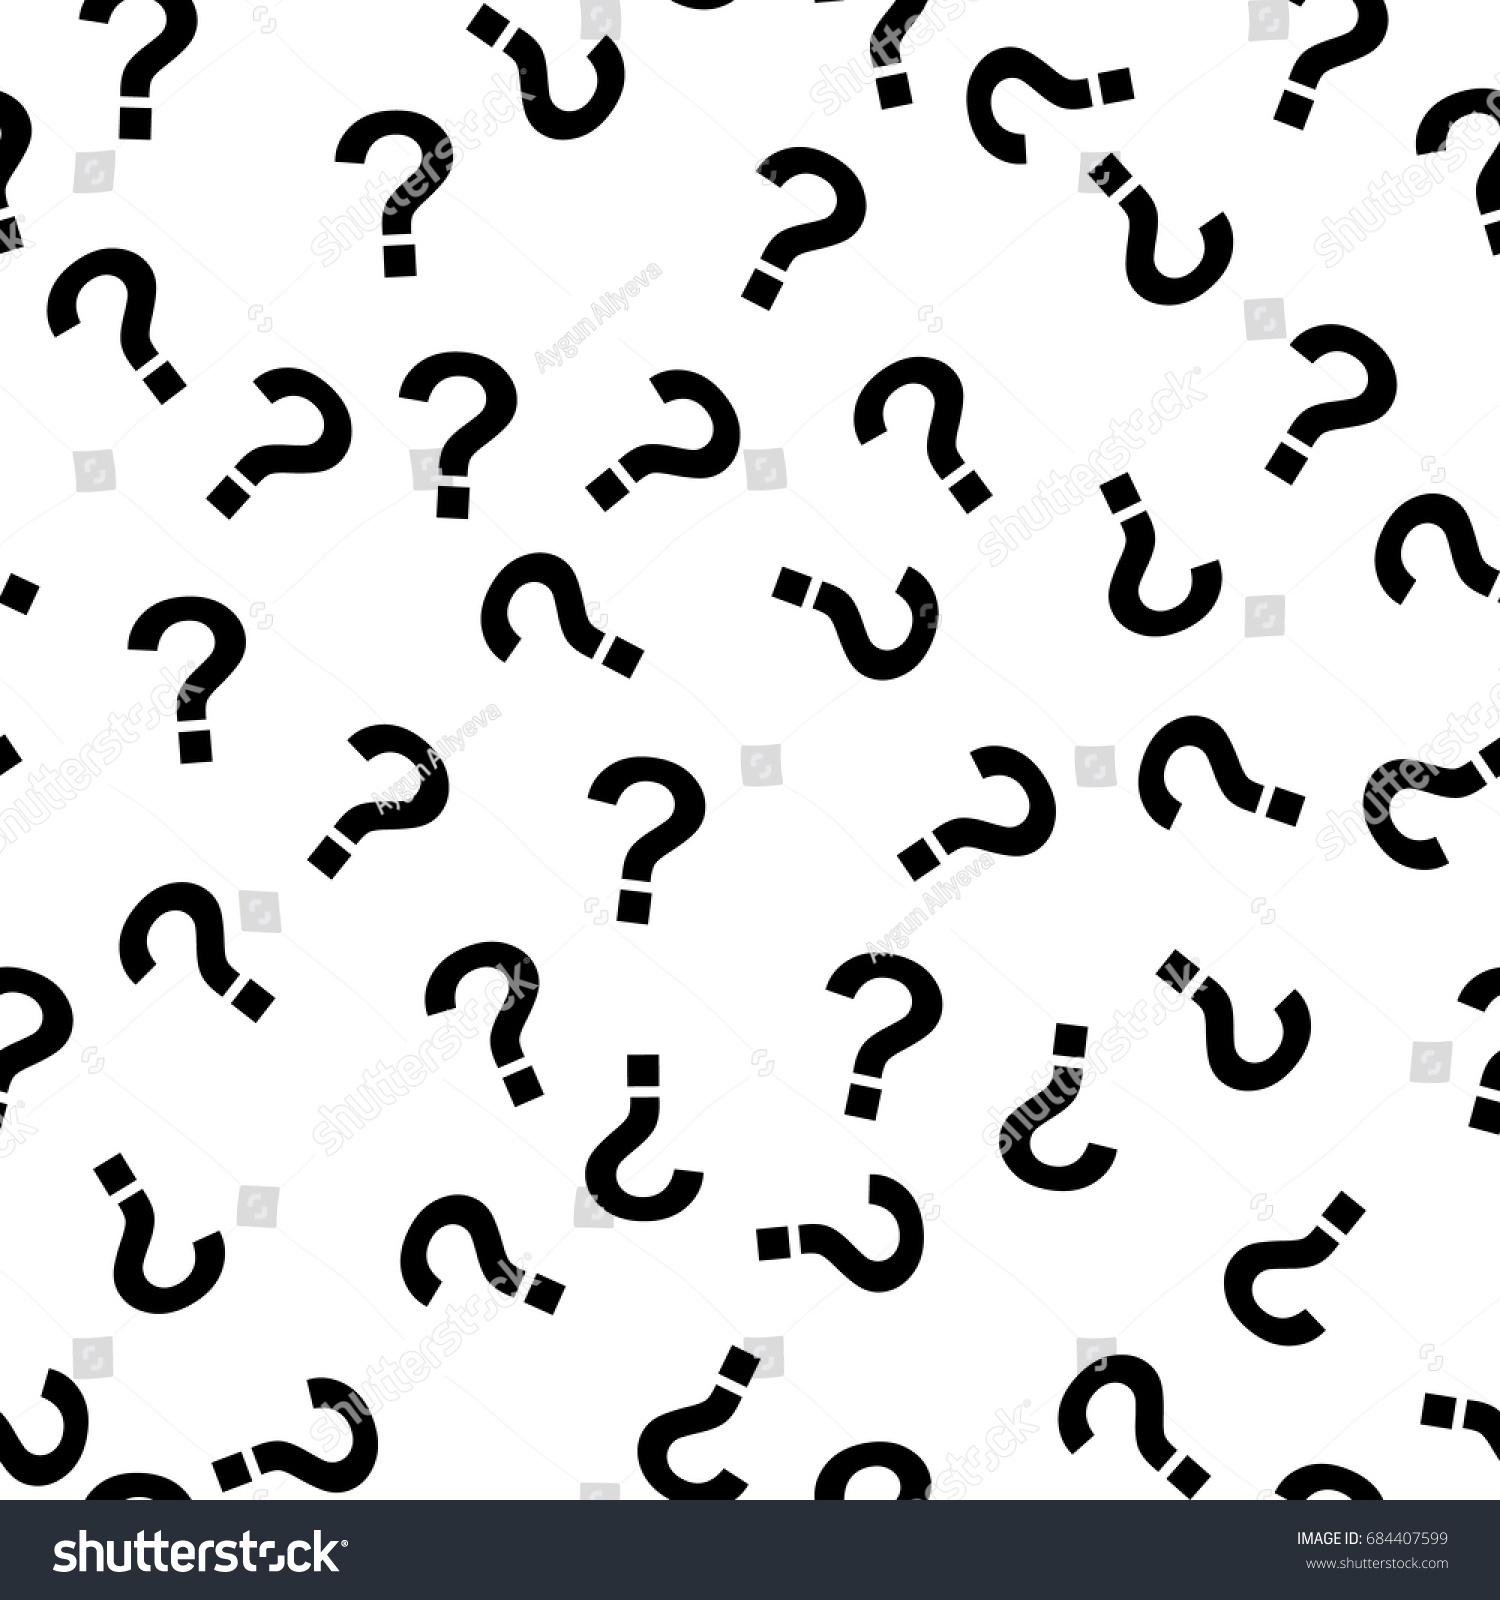 Question Mark Seamless Pattern Vector Seamless Stock Vector Royalty Free 684407599 Shutterstock 1222